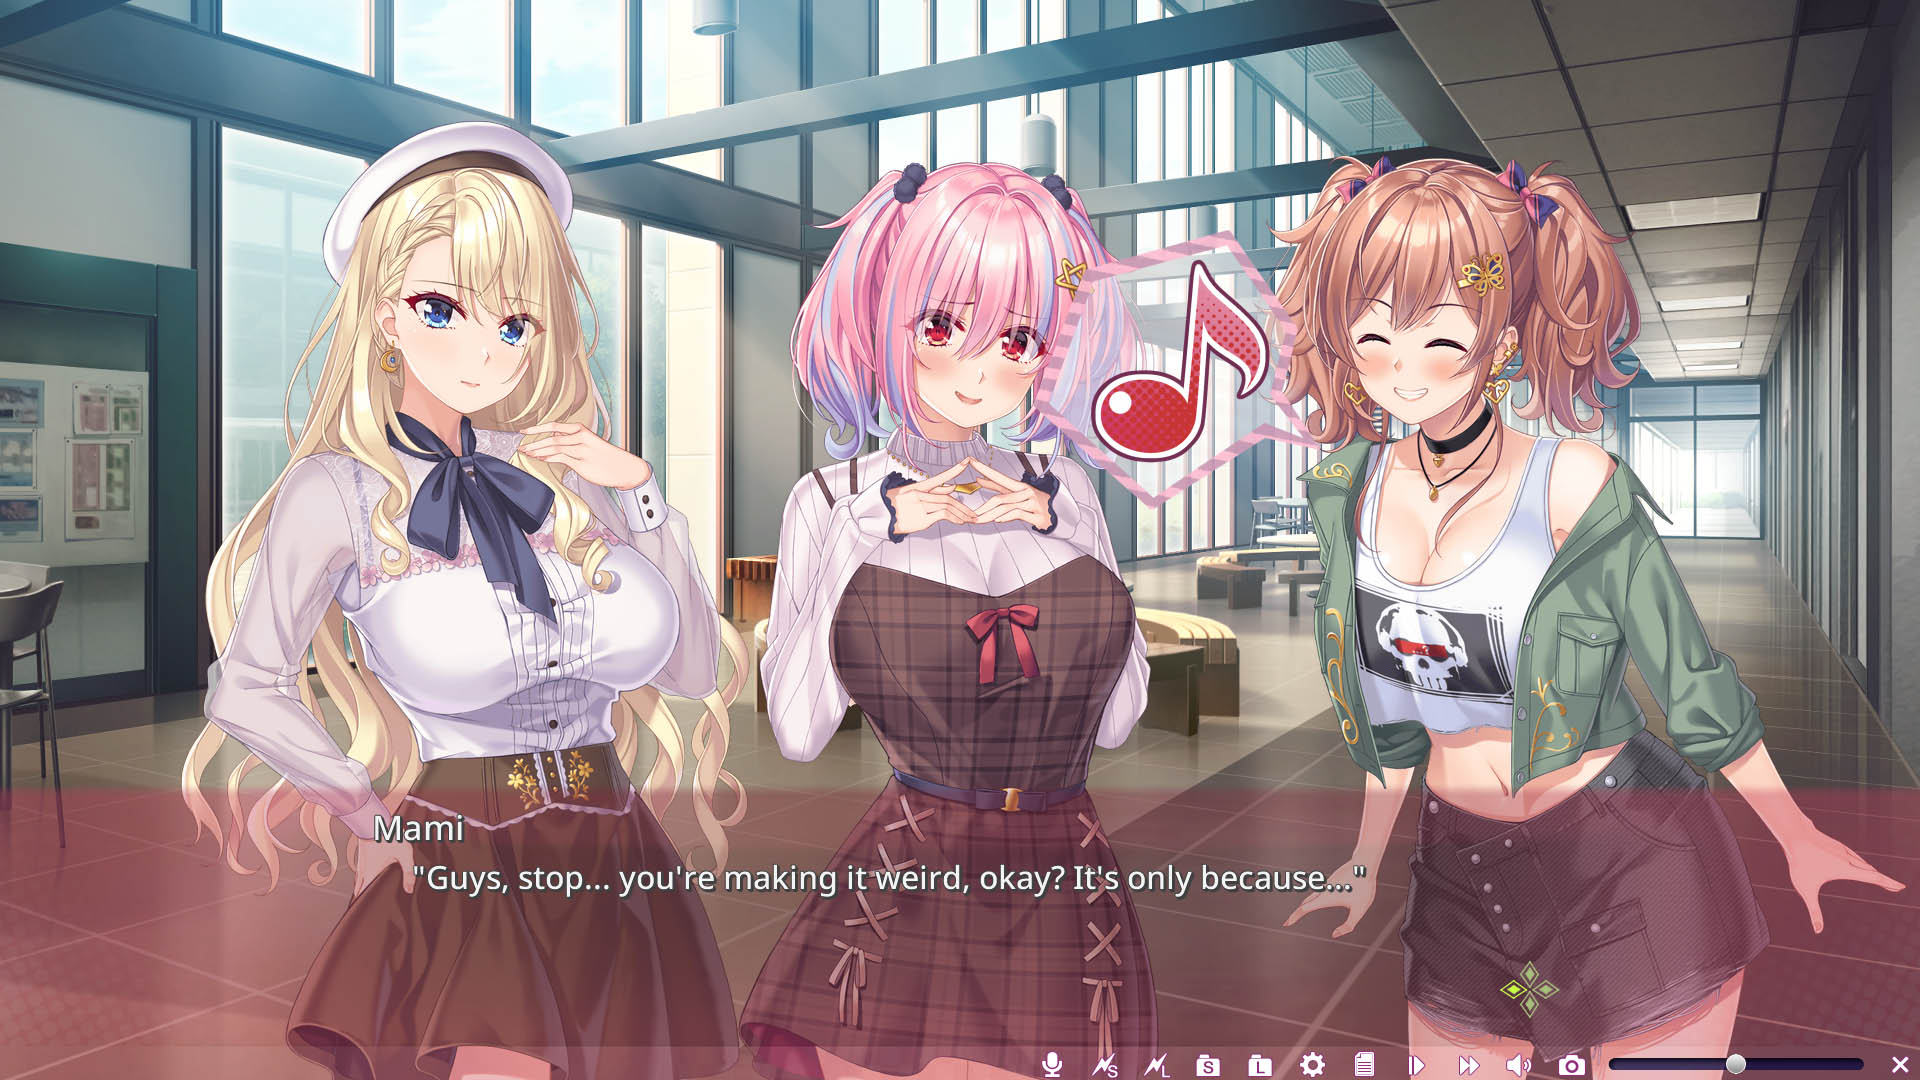 18+ DLC - Succubus Sessions: Mami Mamiya’s Sweet Slice of Hell (English) Patch for Steam - Visual Novel - 4 - Select